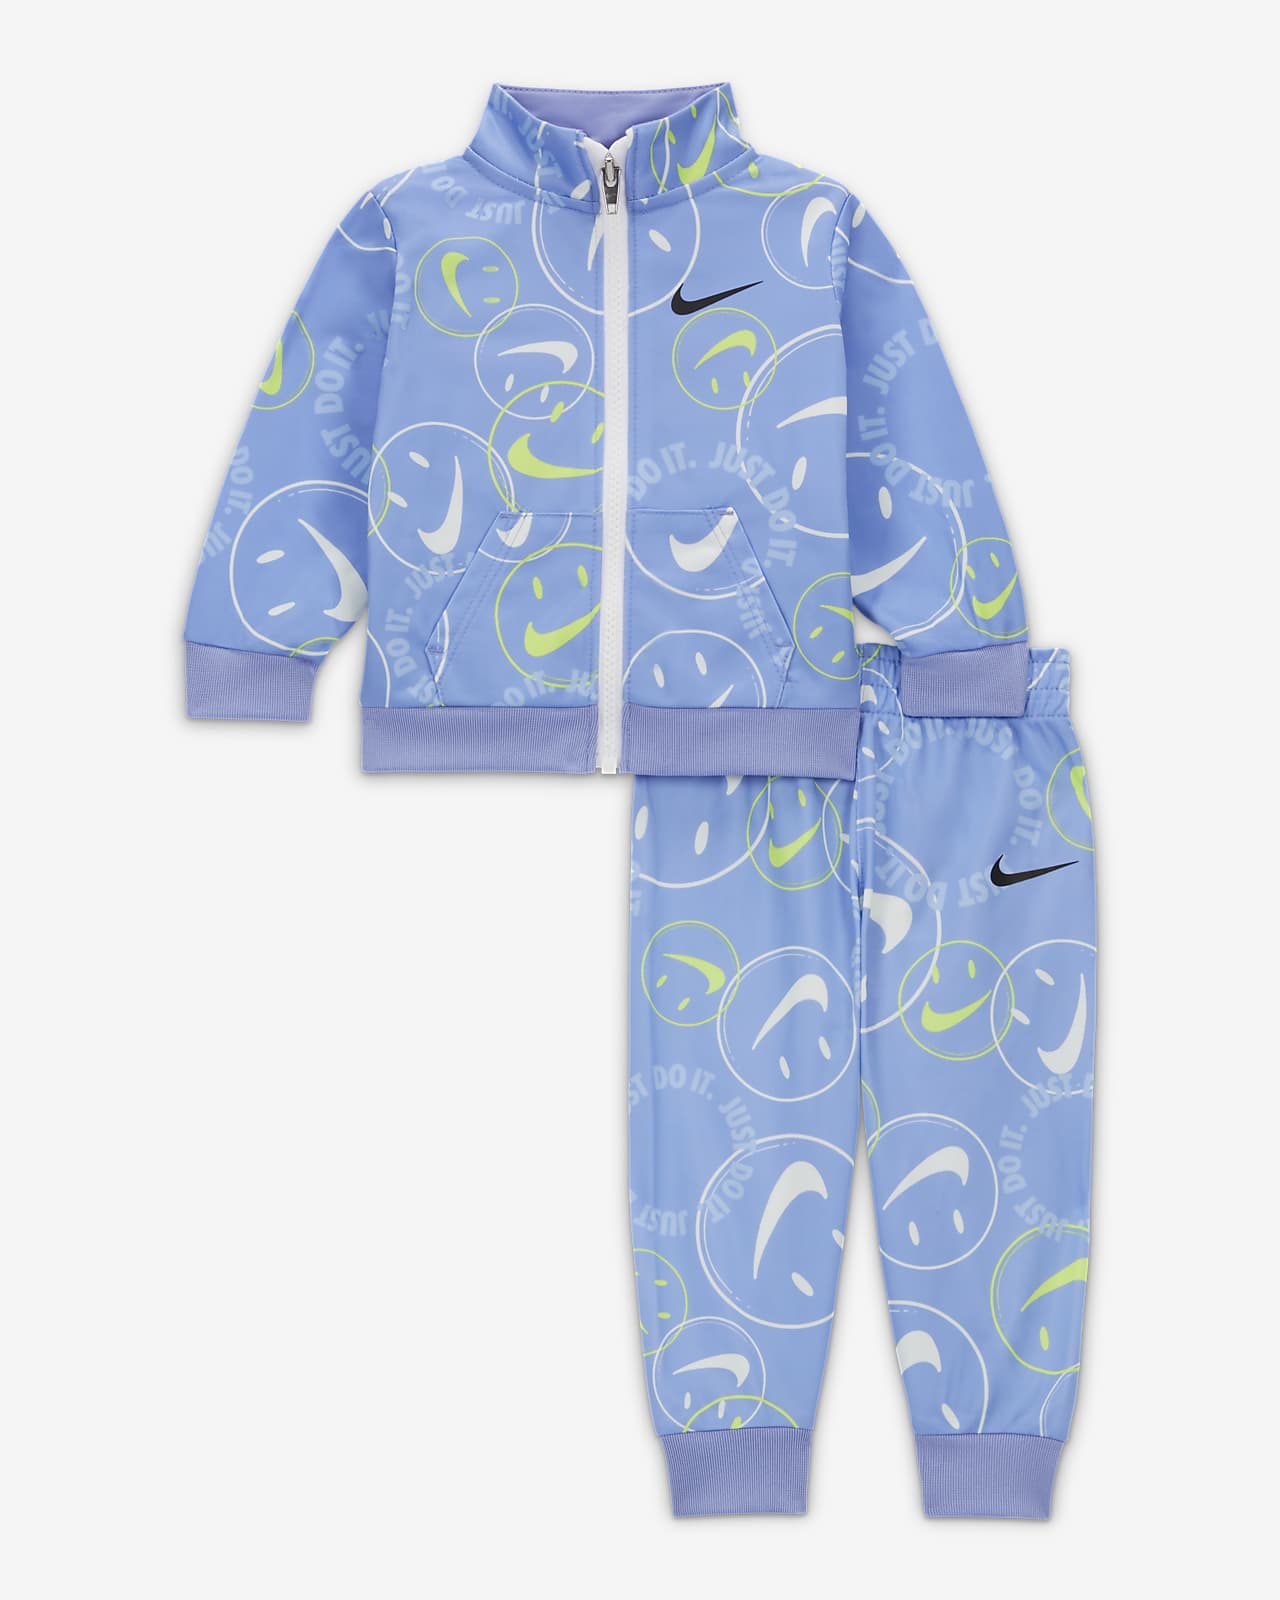 Nike Smiley Swoosh Printed Tricot Set Baby Tracksuit